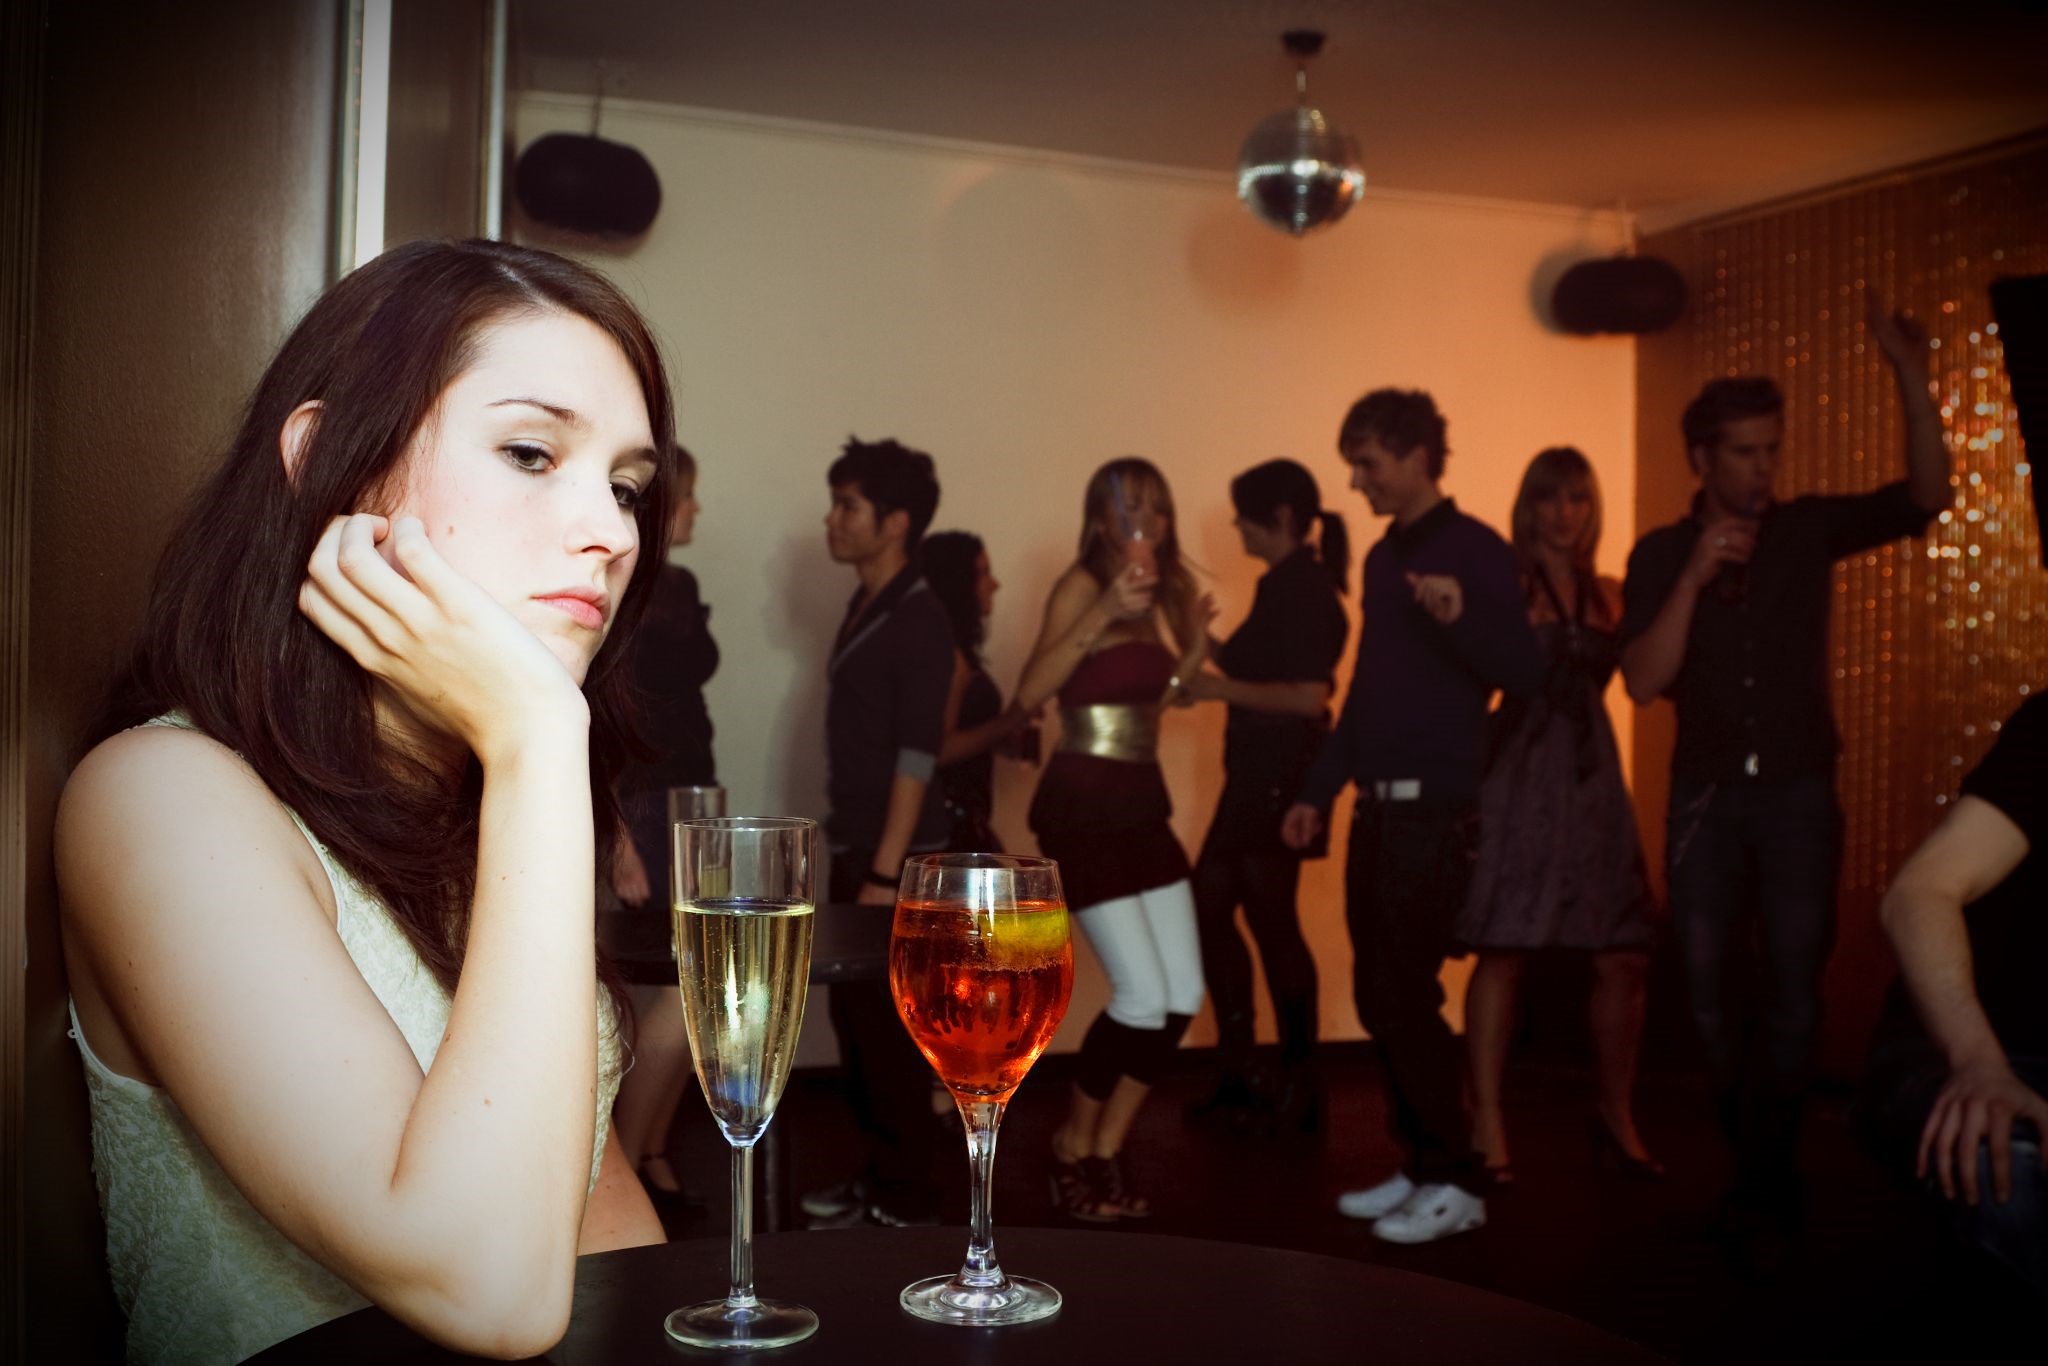 Woman at a party looking depressed